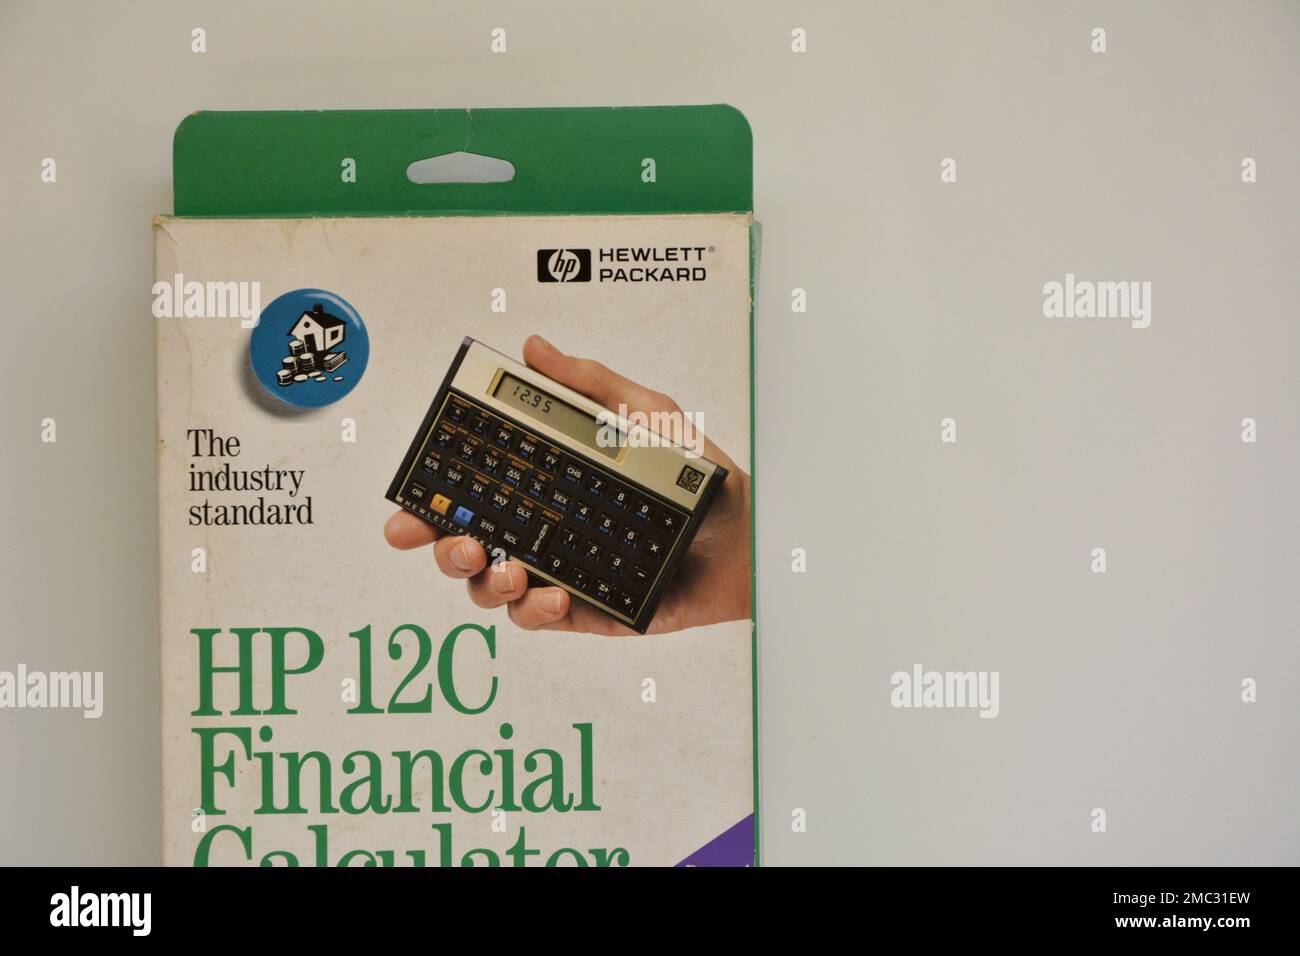 Marilia, São Paulo, Brazil - 17 October 2022: Packaging for the Hewlett Packard financial HP calculator in white and green colors with the company's p Stock Photo